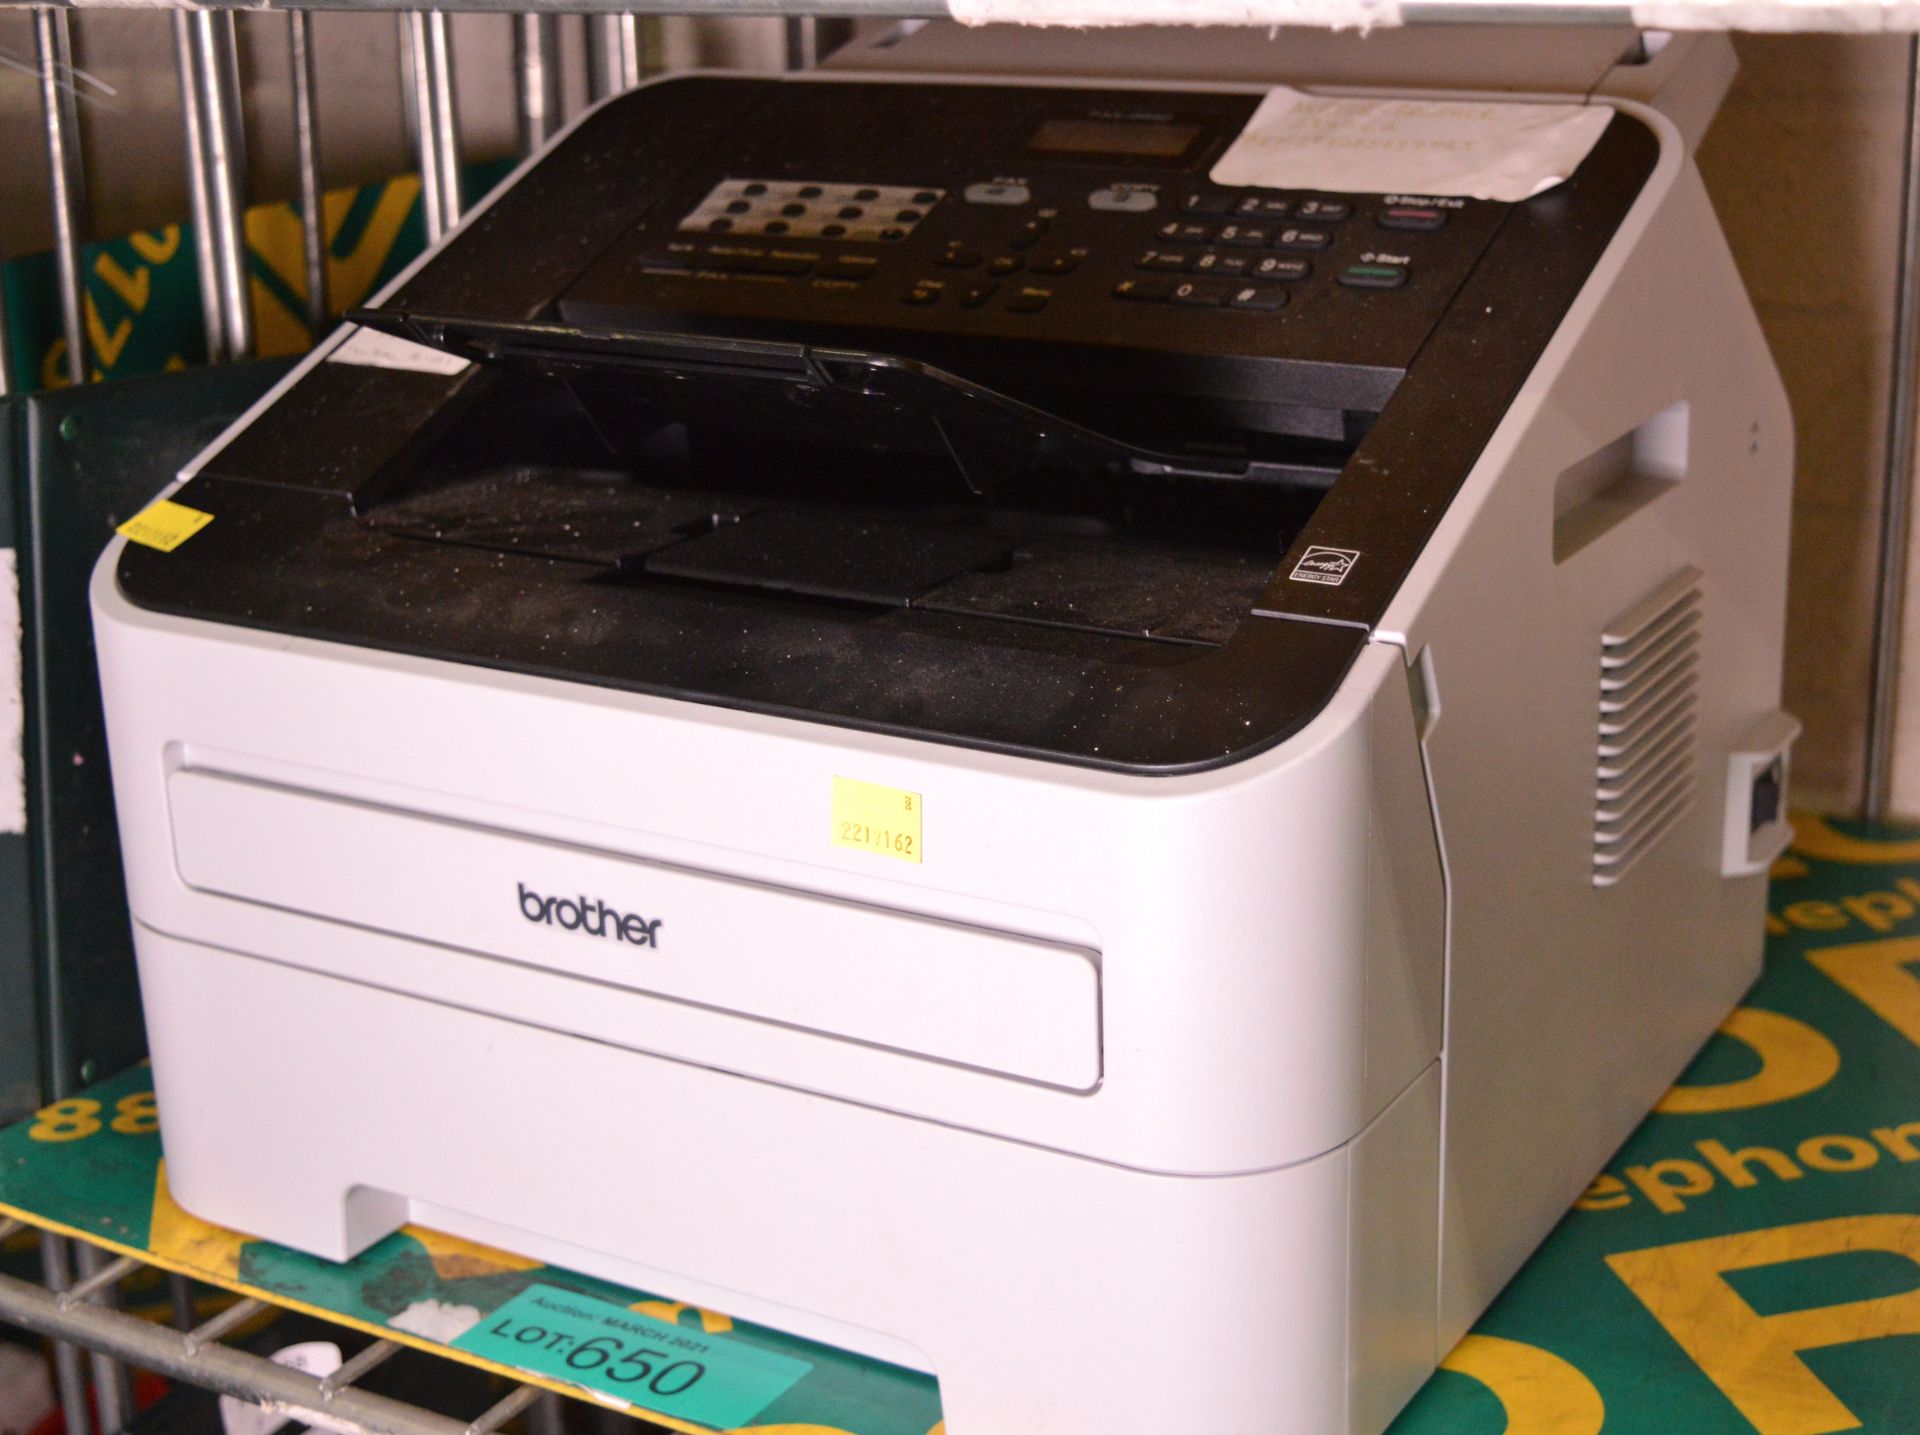 Brother Model Fax-2840 Printer - Image 2 of 2